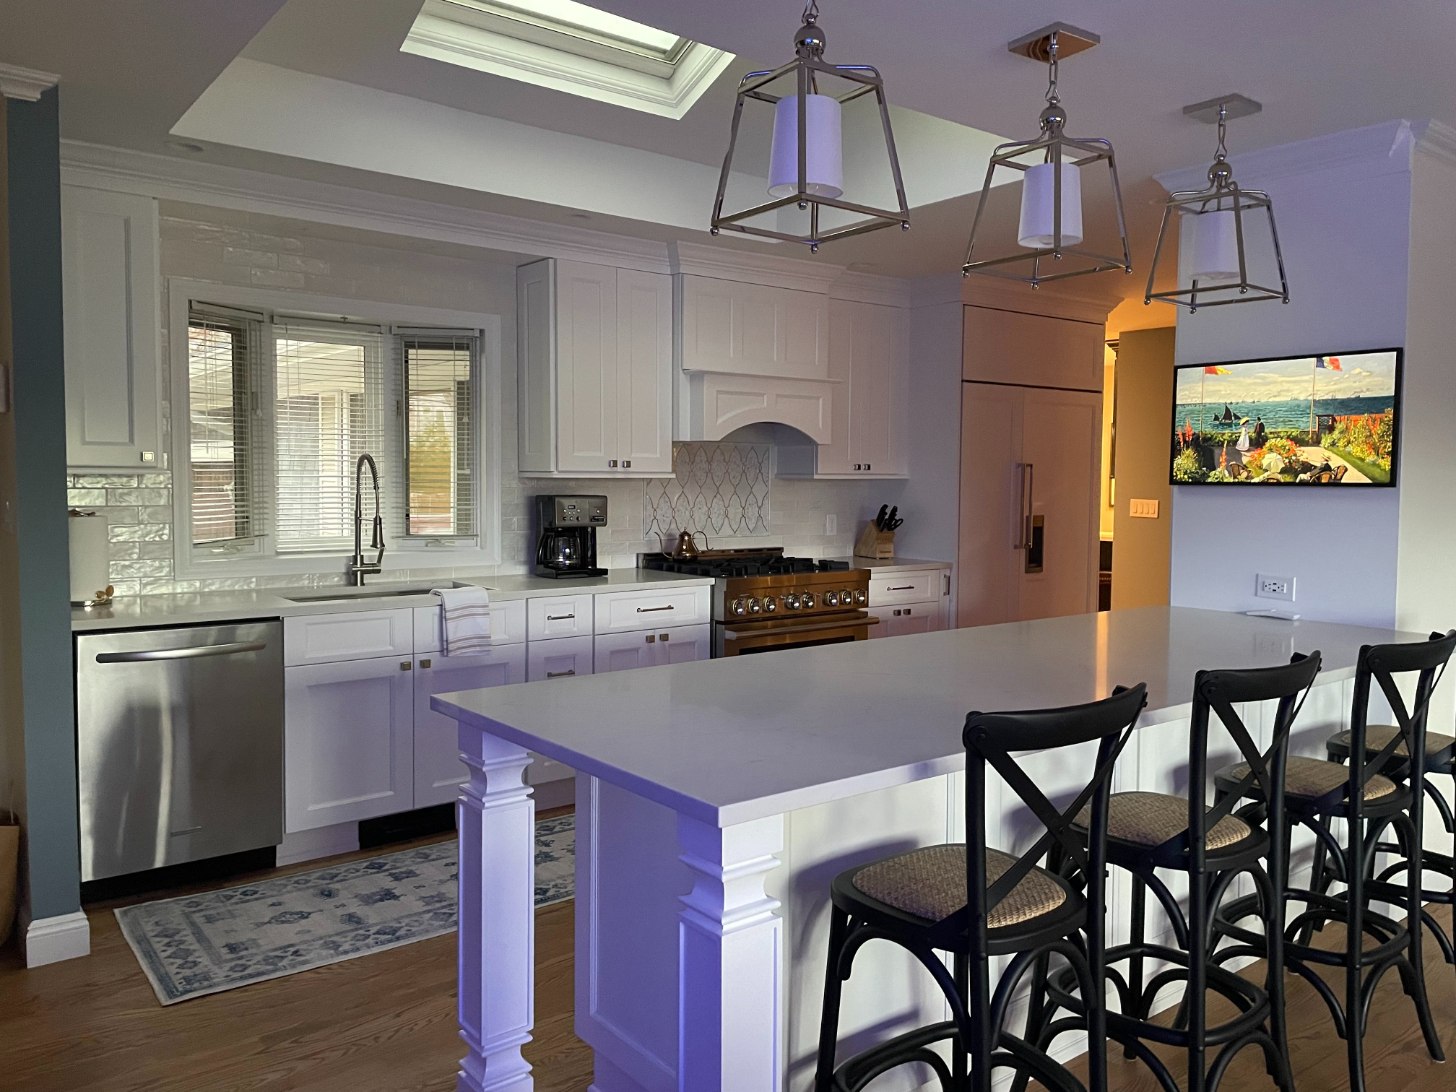 Islip, NY kitchen remodel with skylight above island by Kuhn Construction